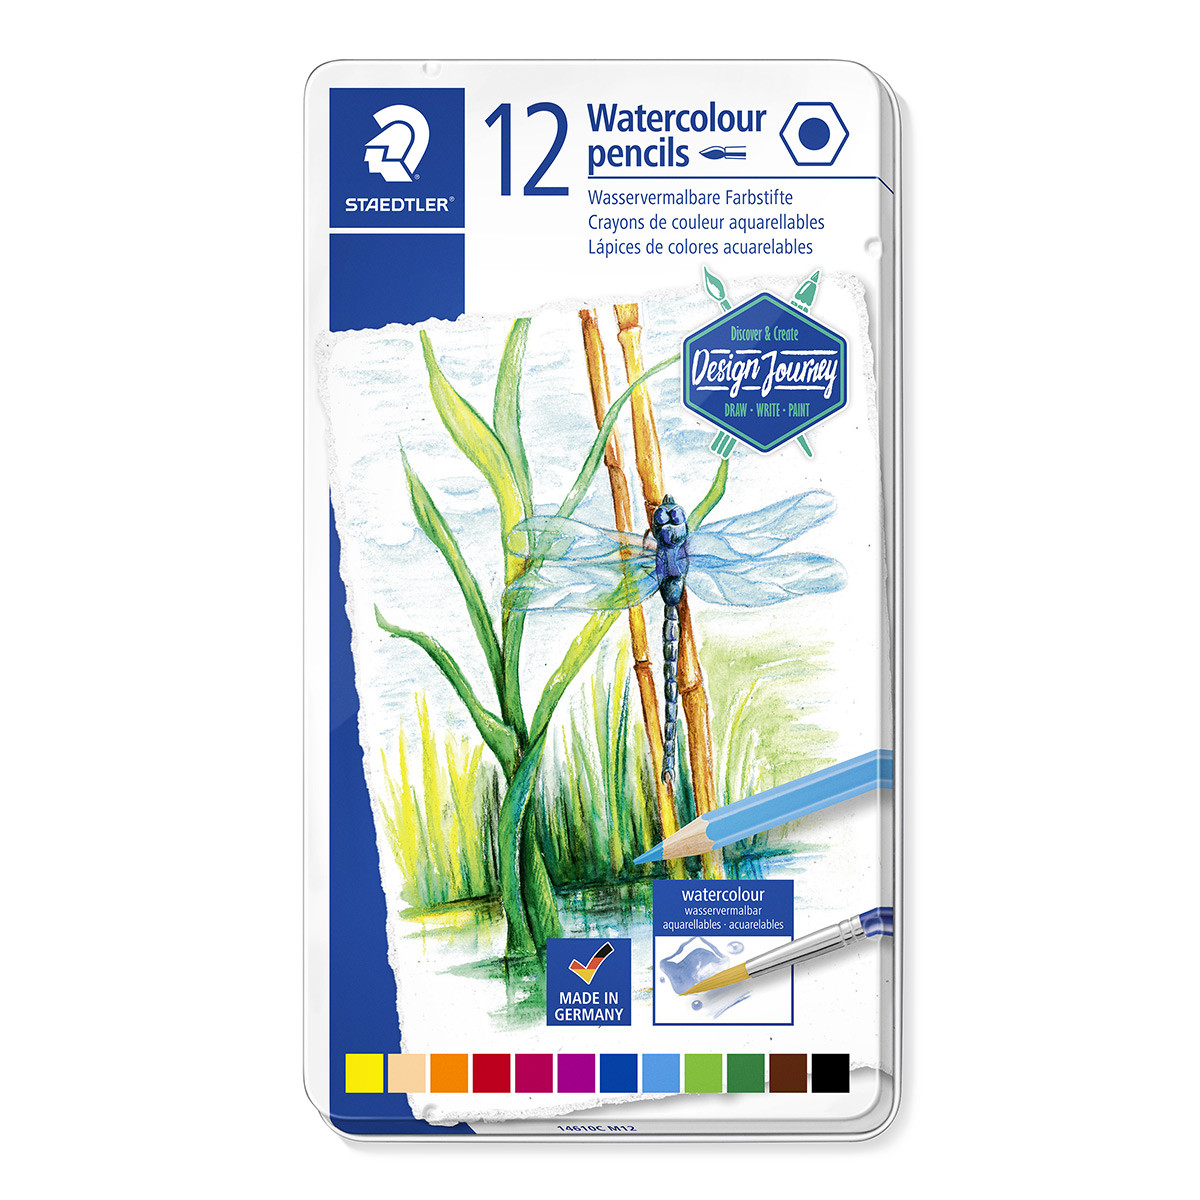 Staedtler Design Journey Watercolour Pencils - Assorted Colours (Tin of 12)